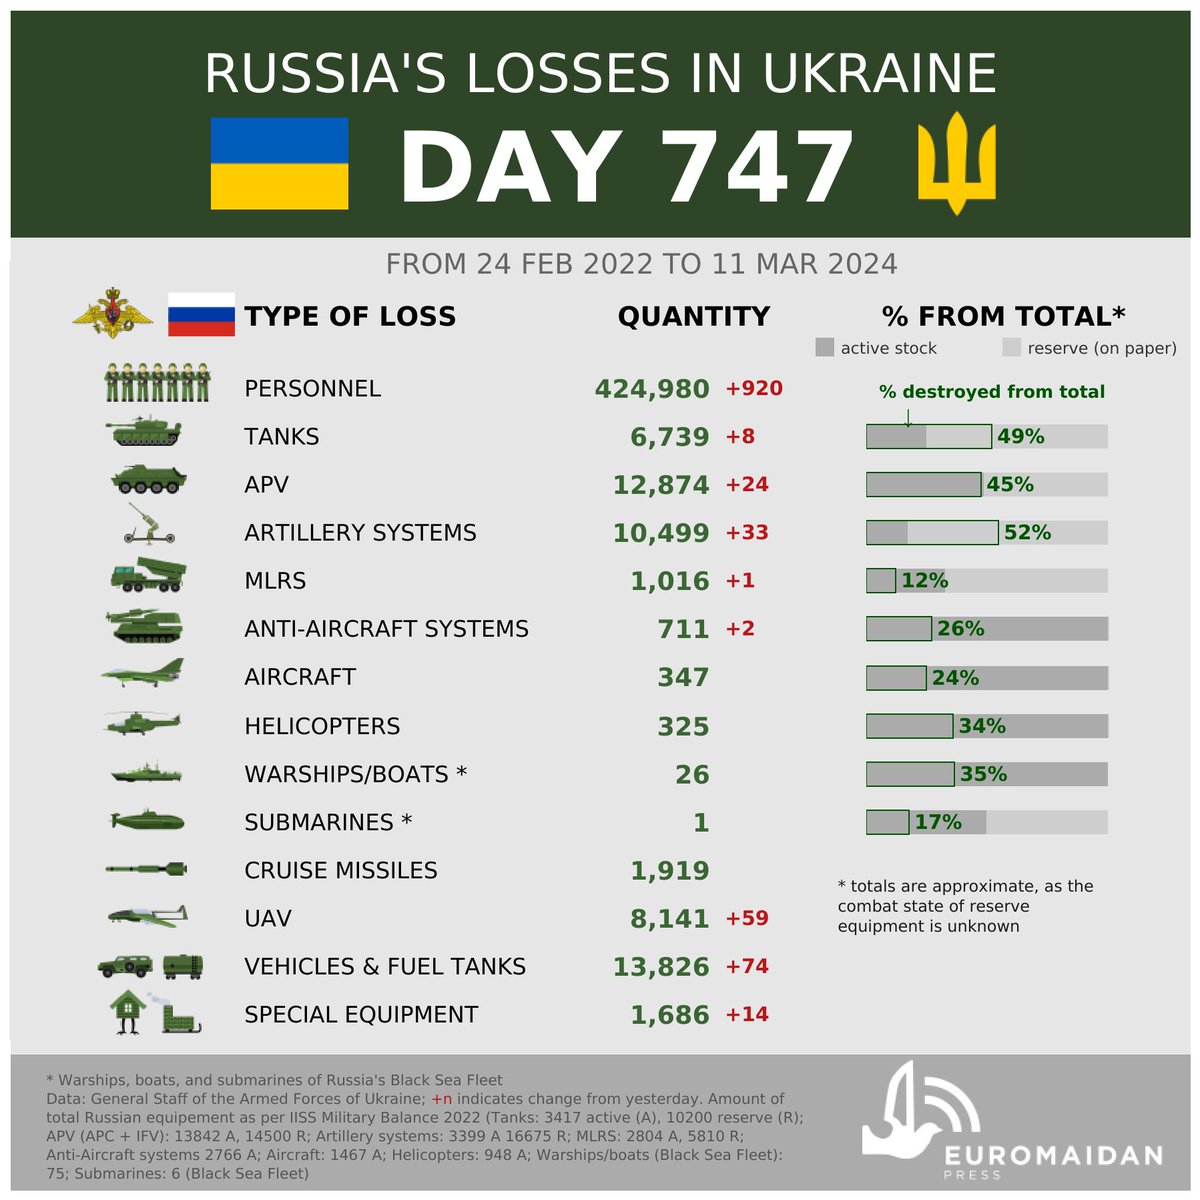 Estimated Russian losses as of day 747 of Russia's full-scale invasion of Ukraine, as per General Staff of the Ukrainian Army: 920 soldiers, 32 pieces of armor, 33 artillery guns, 74 transport vehicles over the past day.